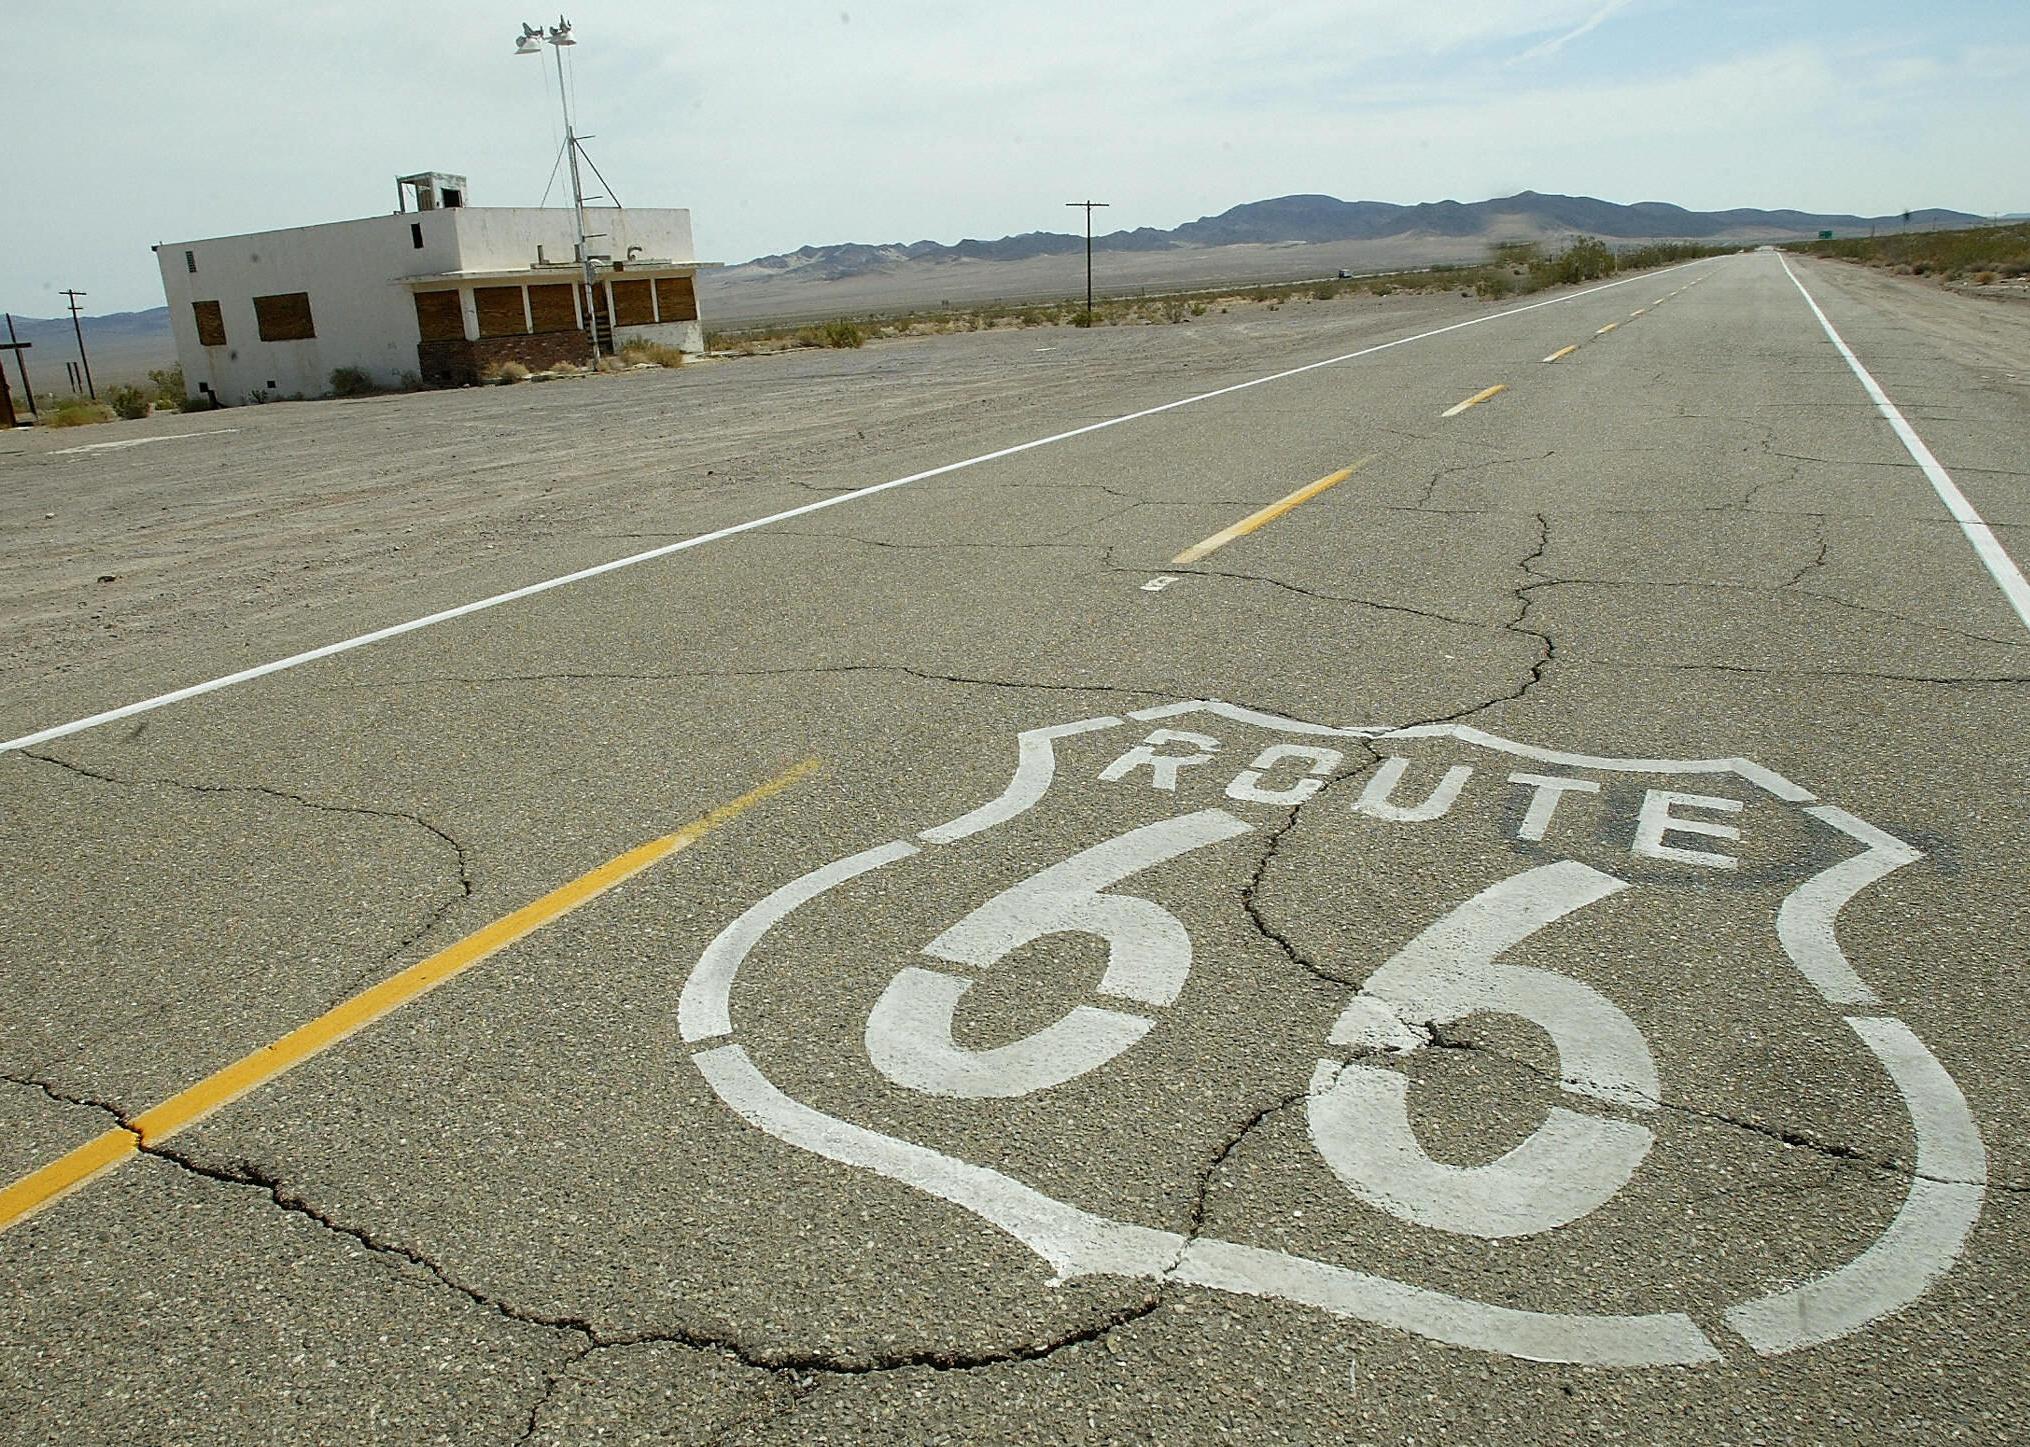 Route 66 painted on the old road through an abandoned town in California